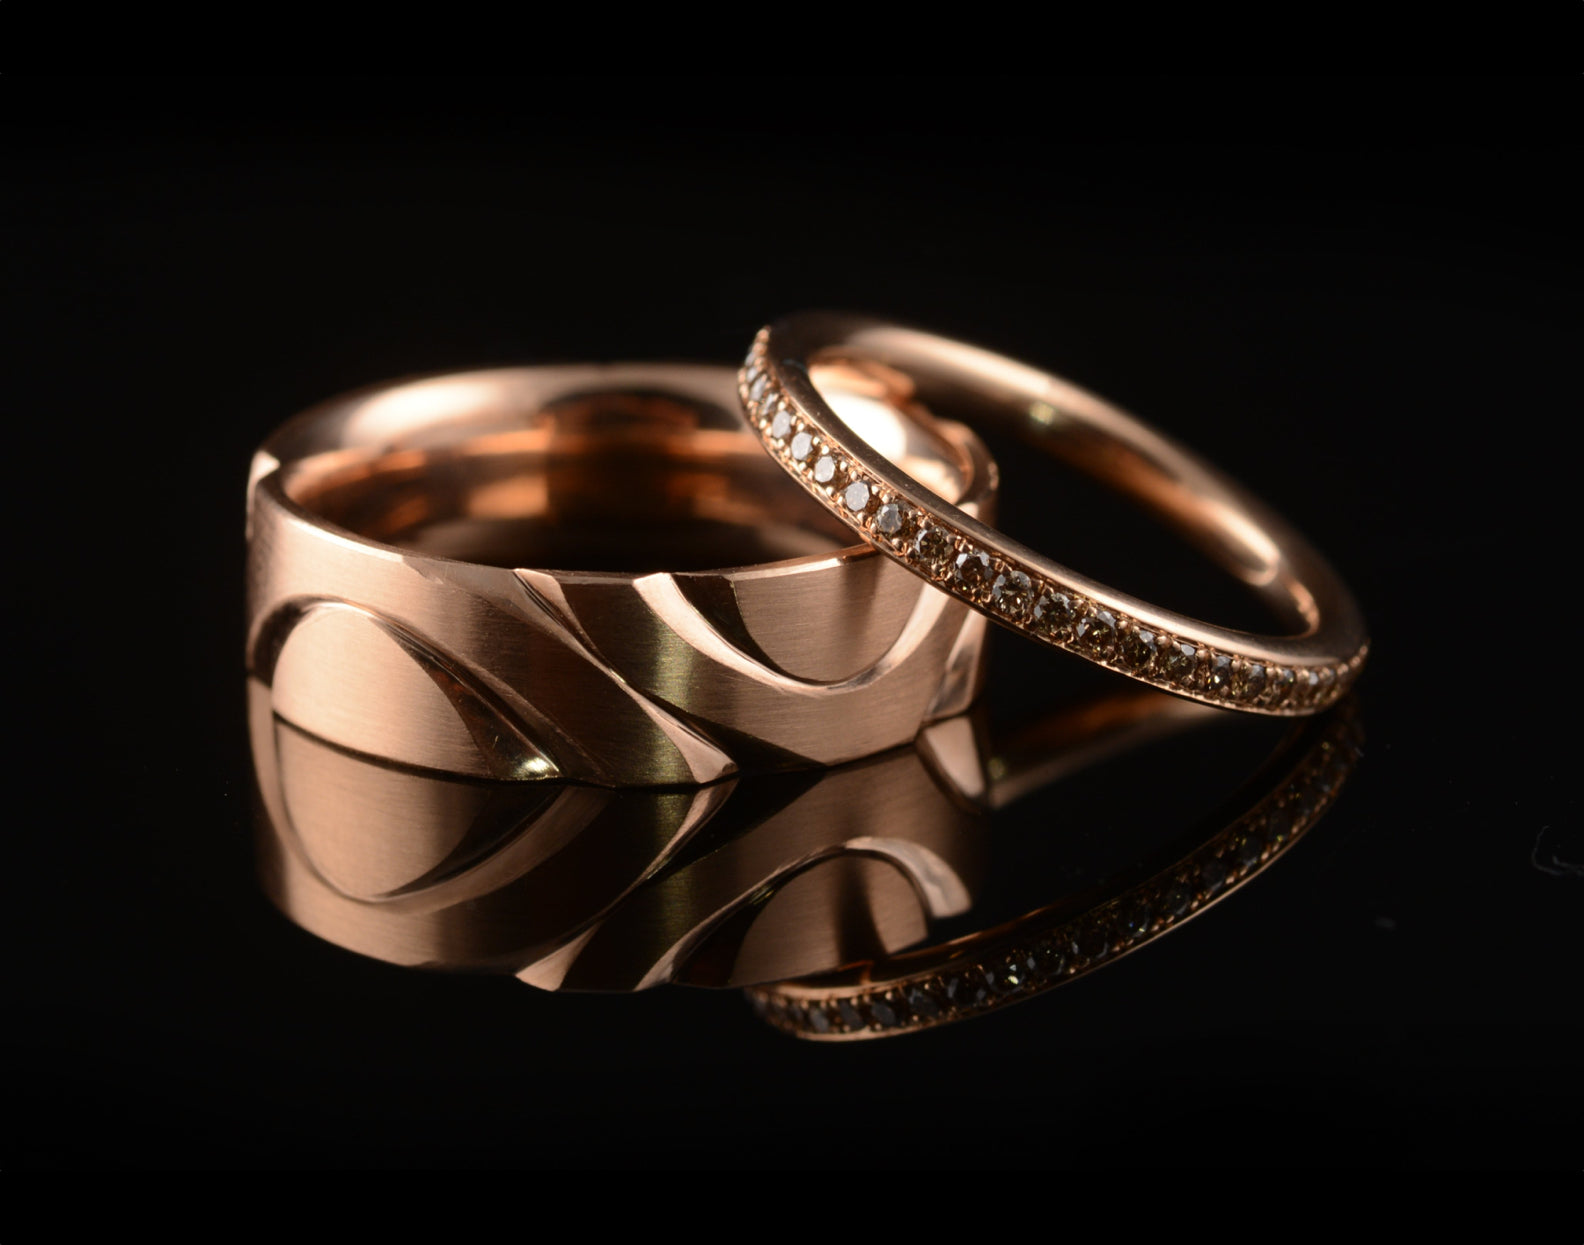 Unusual wedding rings: matching rose gold and cognac diamond mens and womens wedding rings